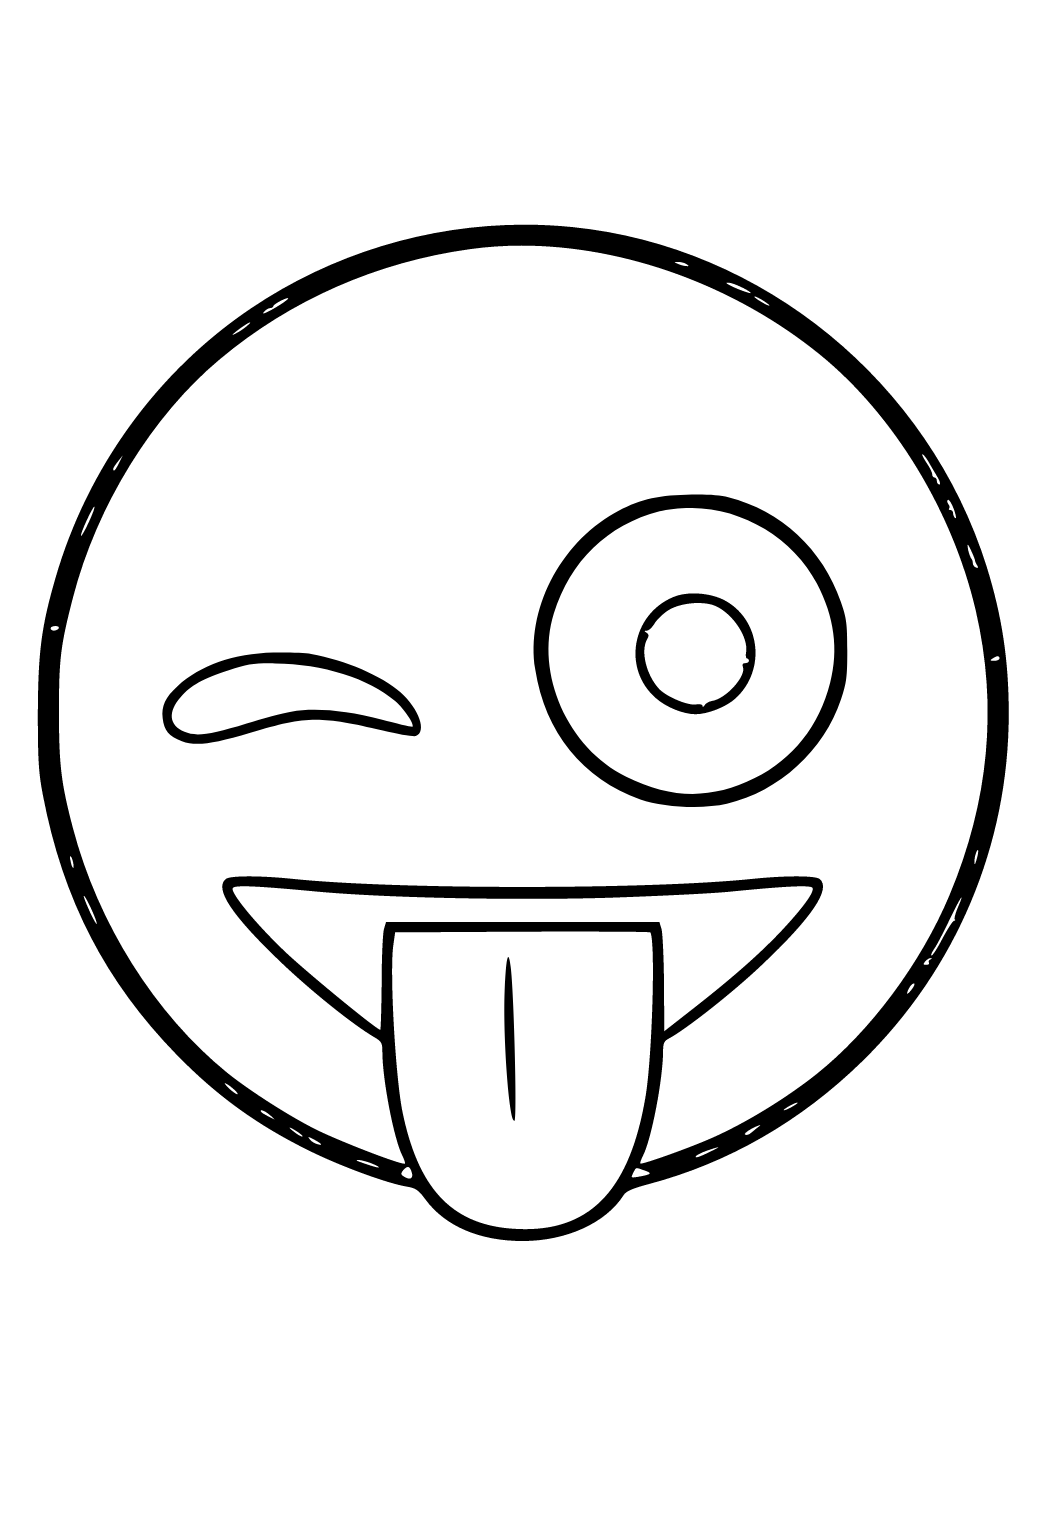 Free printable emoji tease coloring page for adults and kids